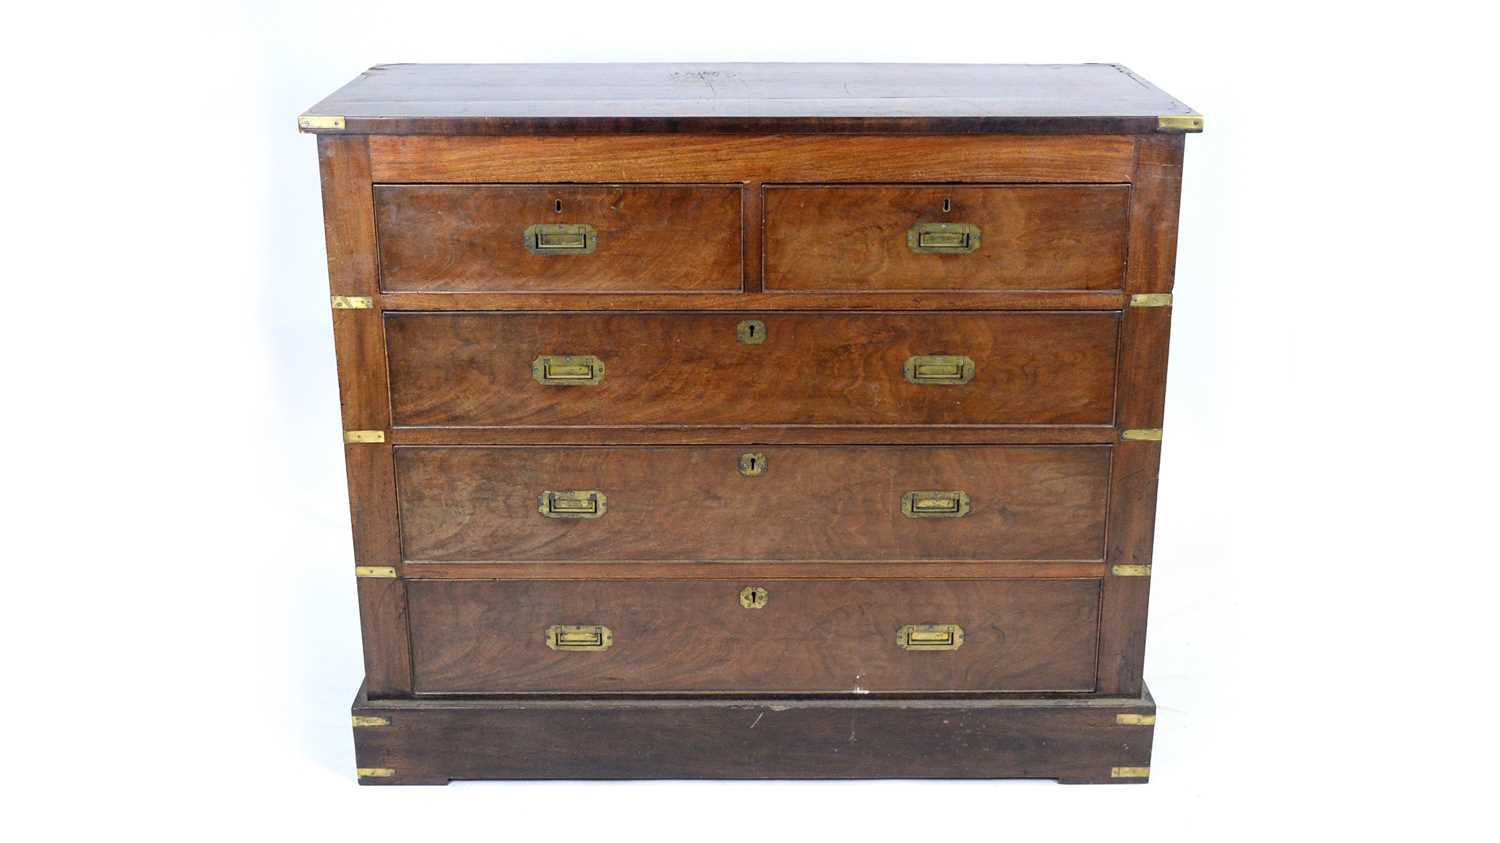 Lot 93 - A 19th Century mahogany and brass bound military chest.